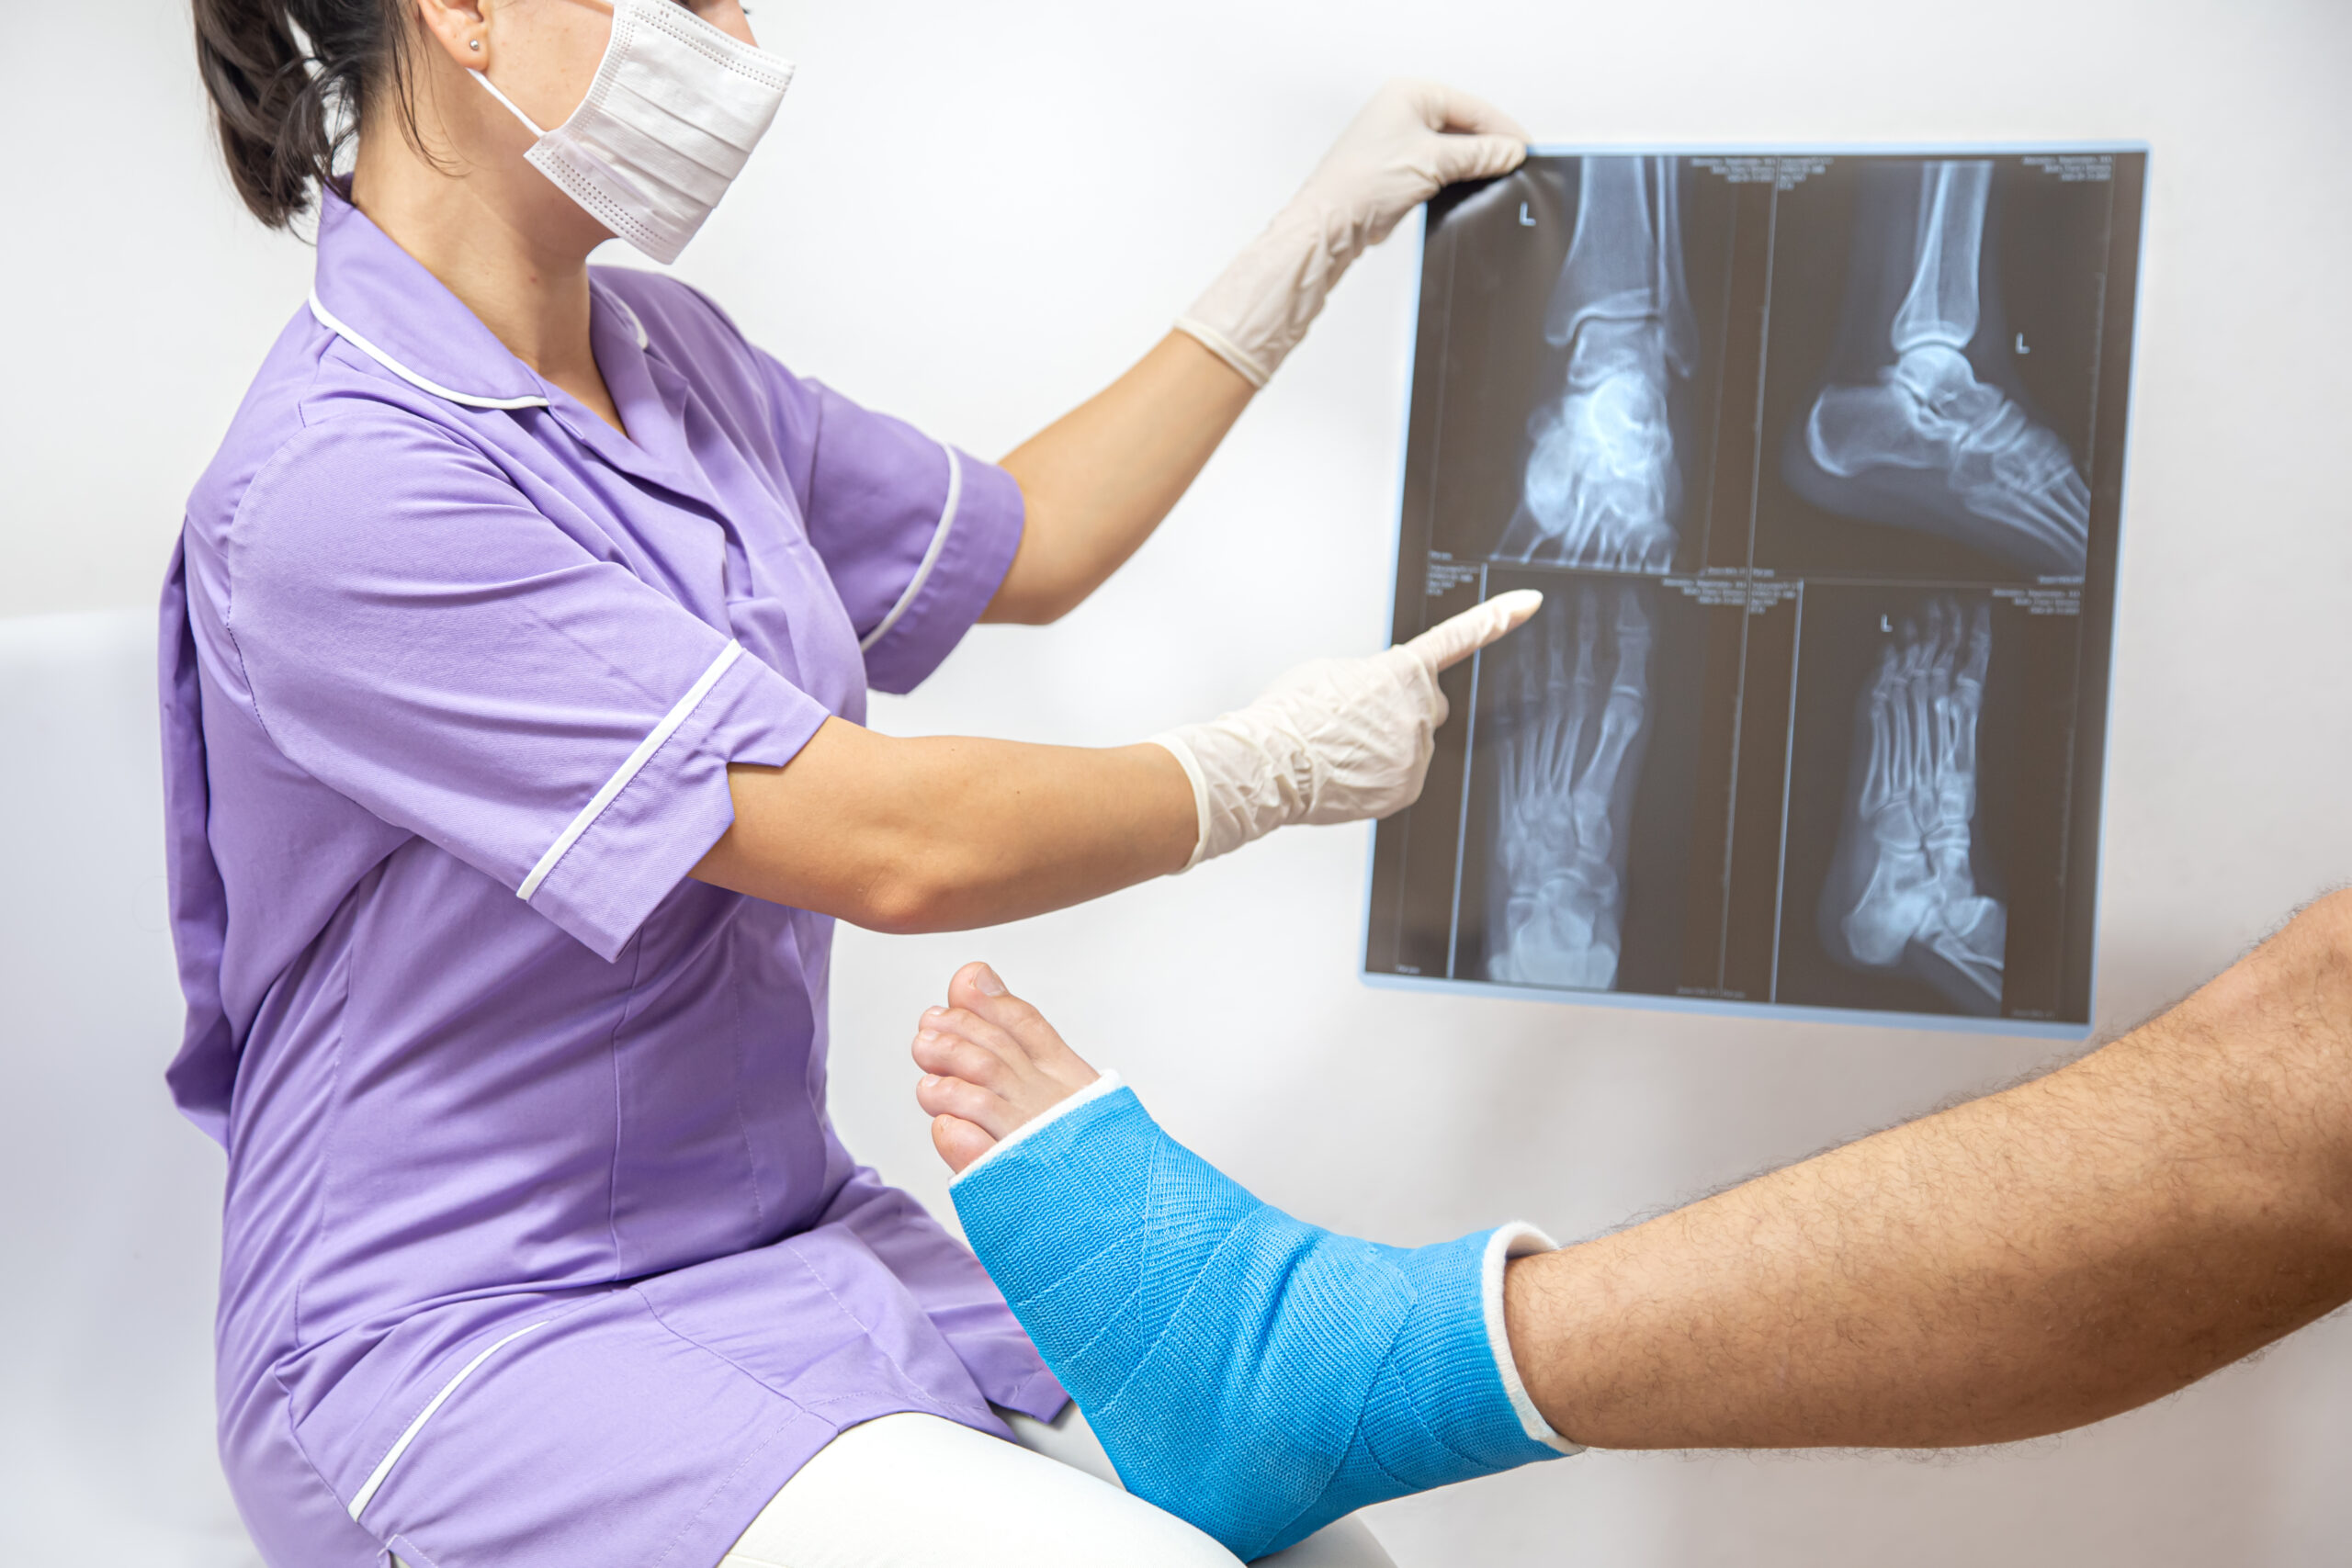 bone-fracture-foot-leg-male-patient-being-examined-by-woman-doctor-hospital